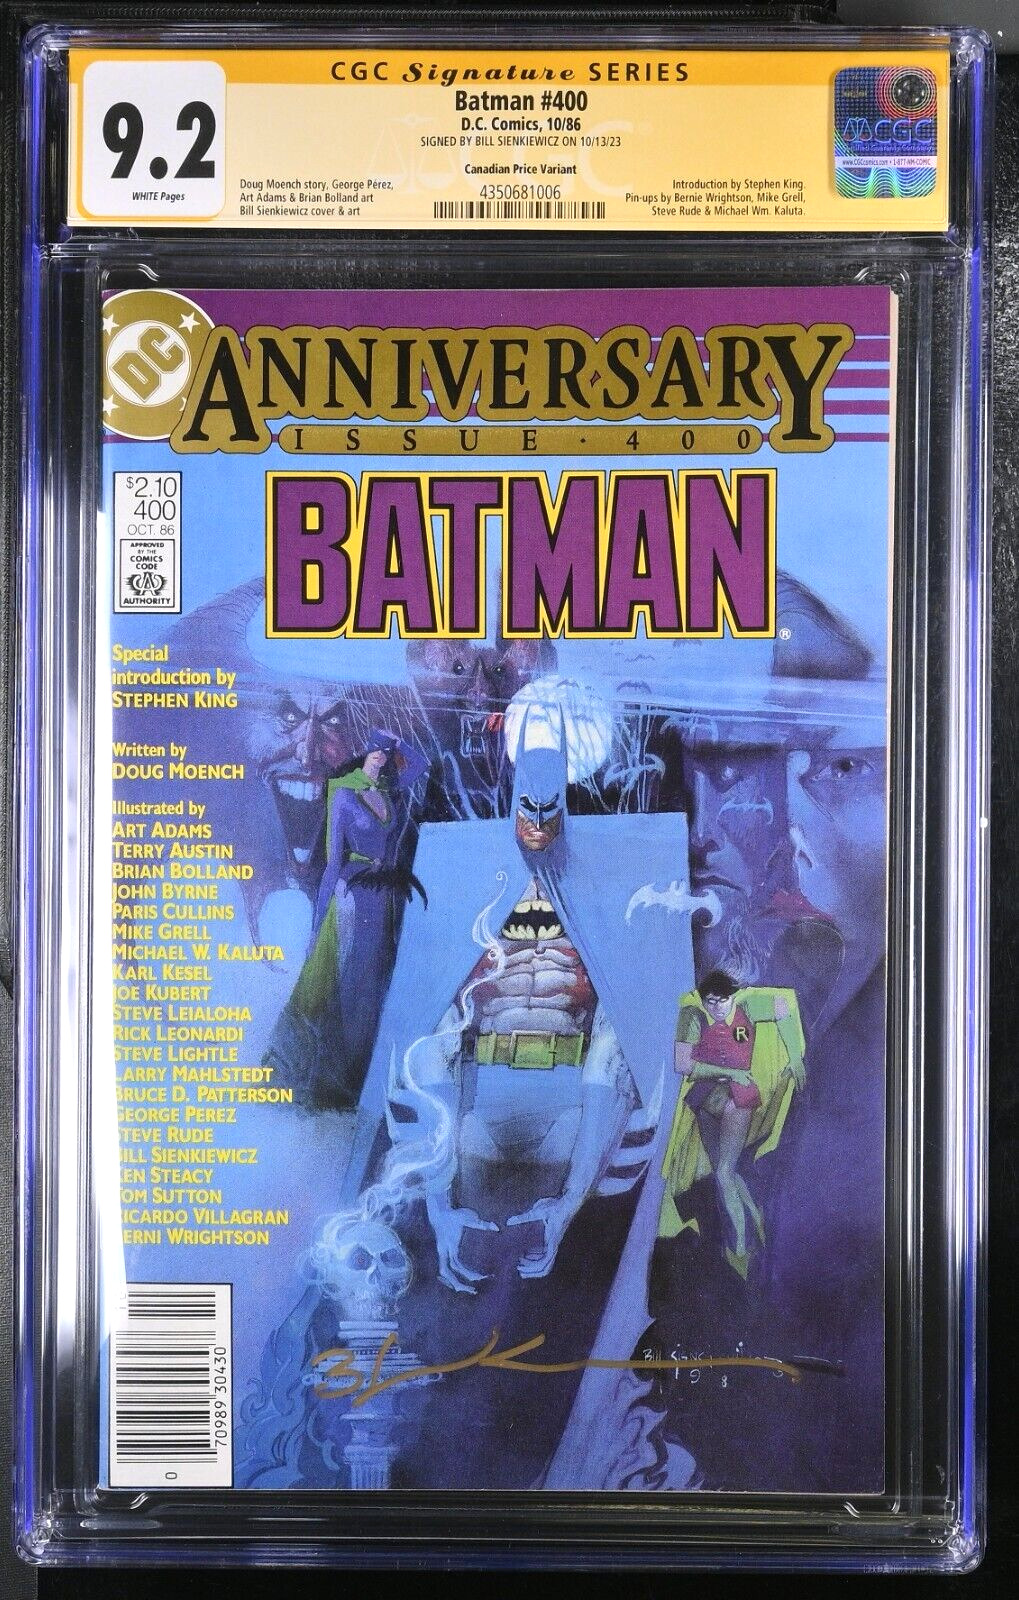 Batman #400 CGC SS 9.2 Signed by Sienkiewicz ULTRA RARE CANADIAN VARIANT CPV